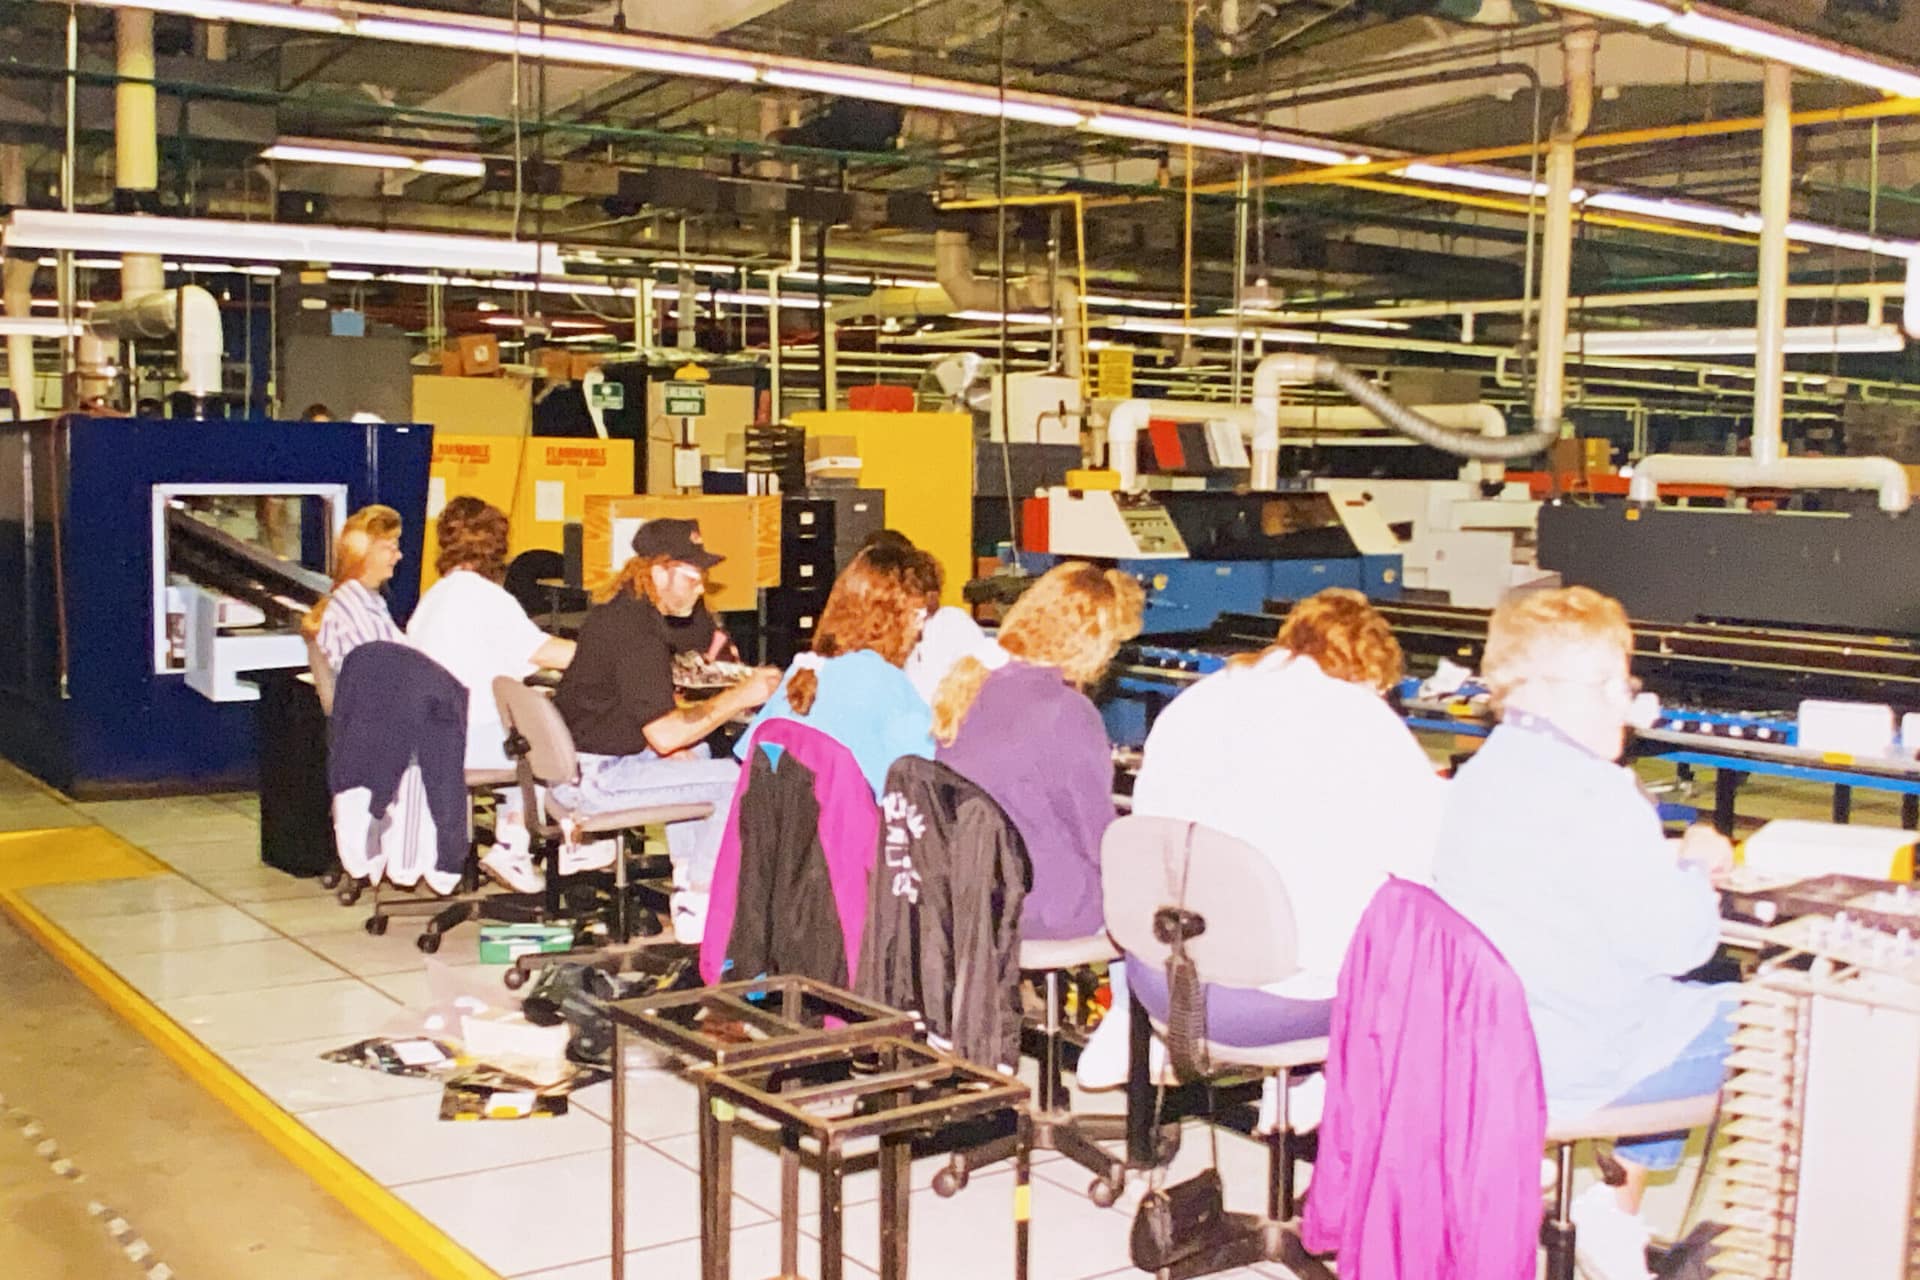 The original RiverSide workers in 1984, hand assembling and soldering PCBAs in a traditional assembly line.